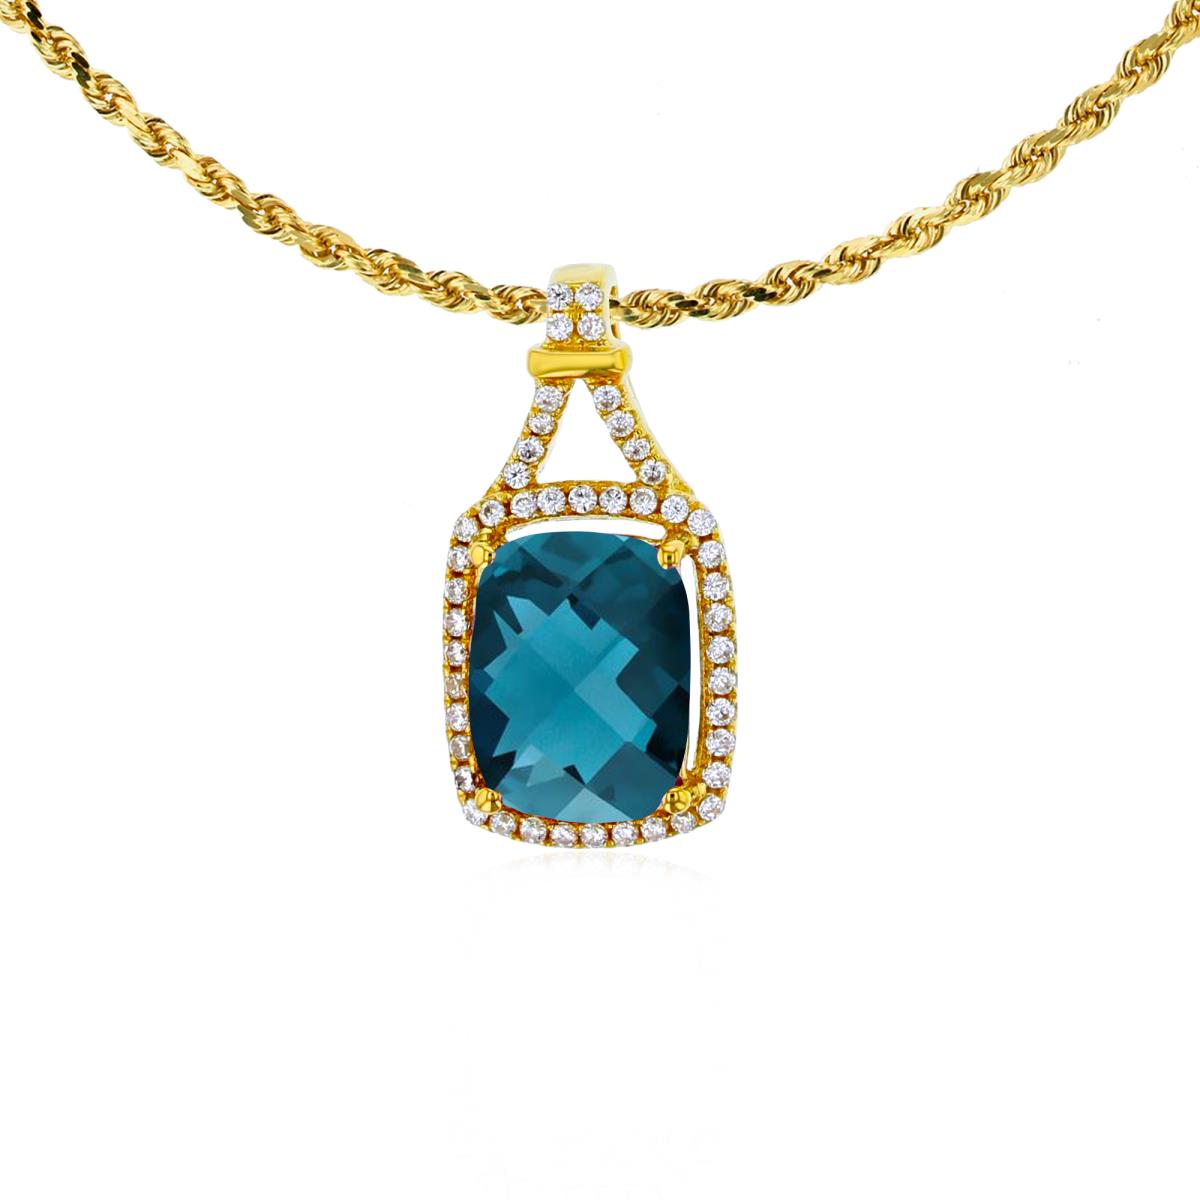 14K Yellow Gold 8x6mm Cushion London Blue Topaz & 0.13 CTTW Rd Diamonds Halo 18" Rope Chain Necklace